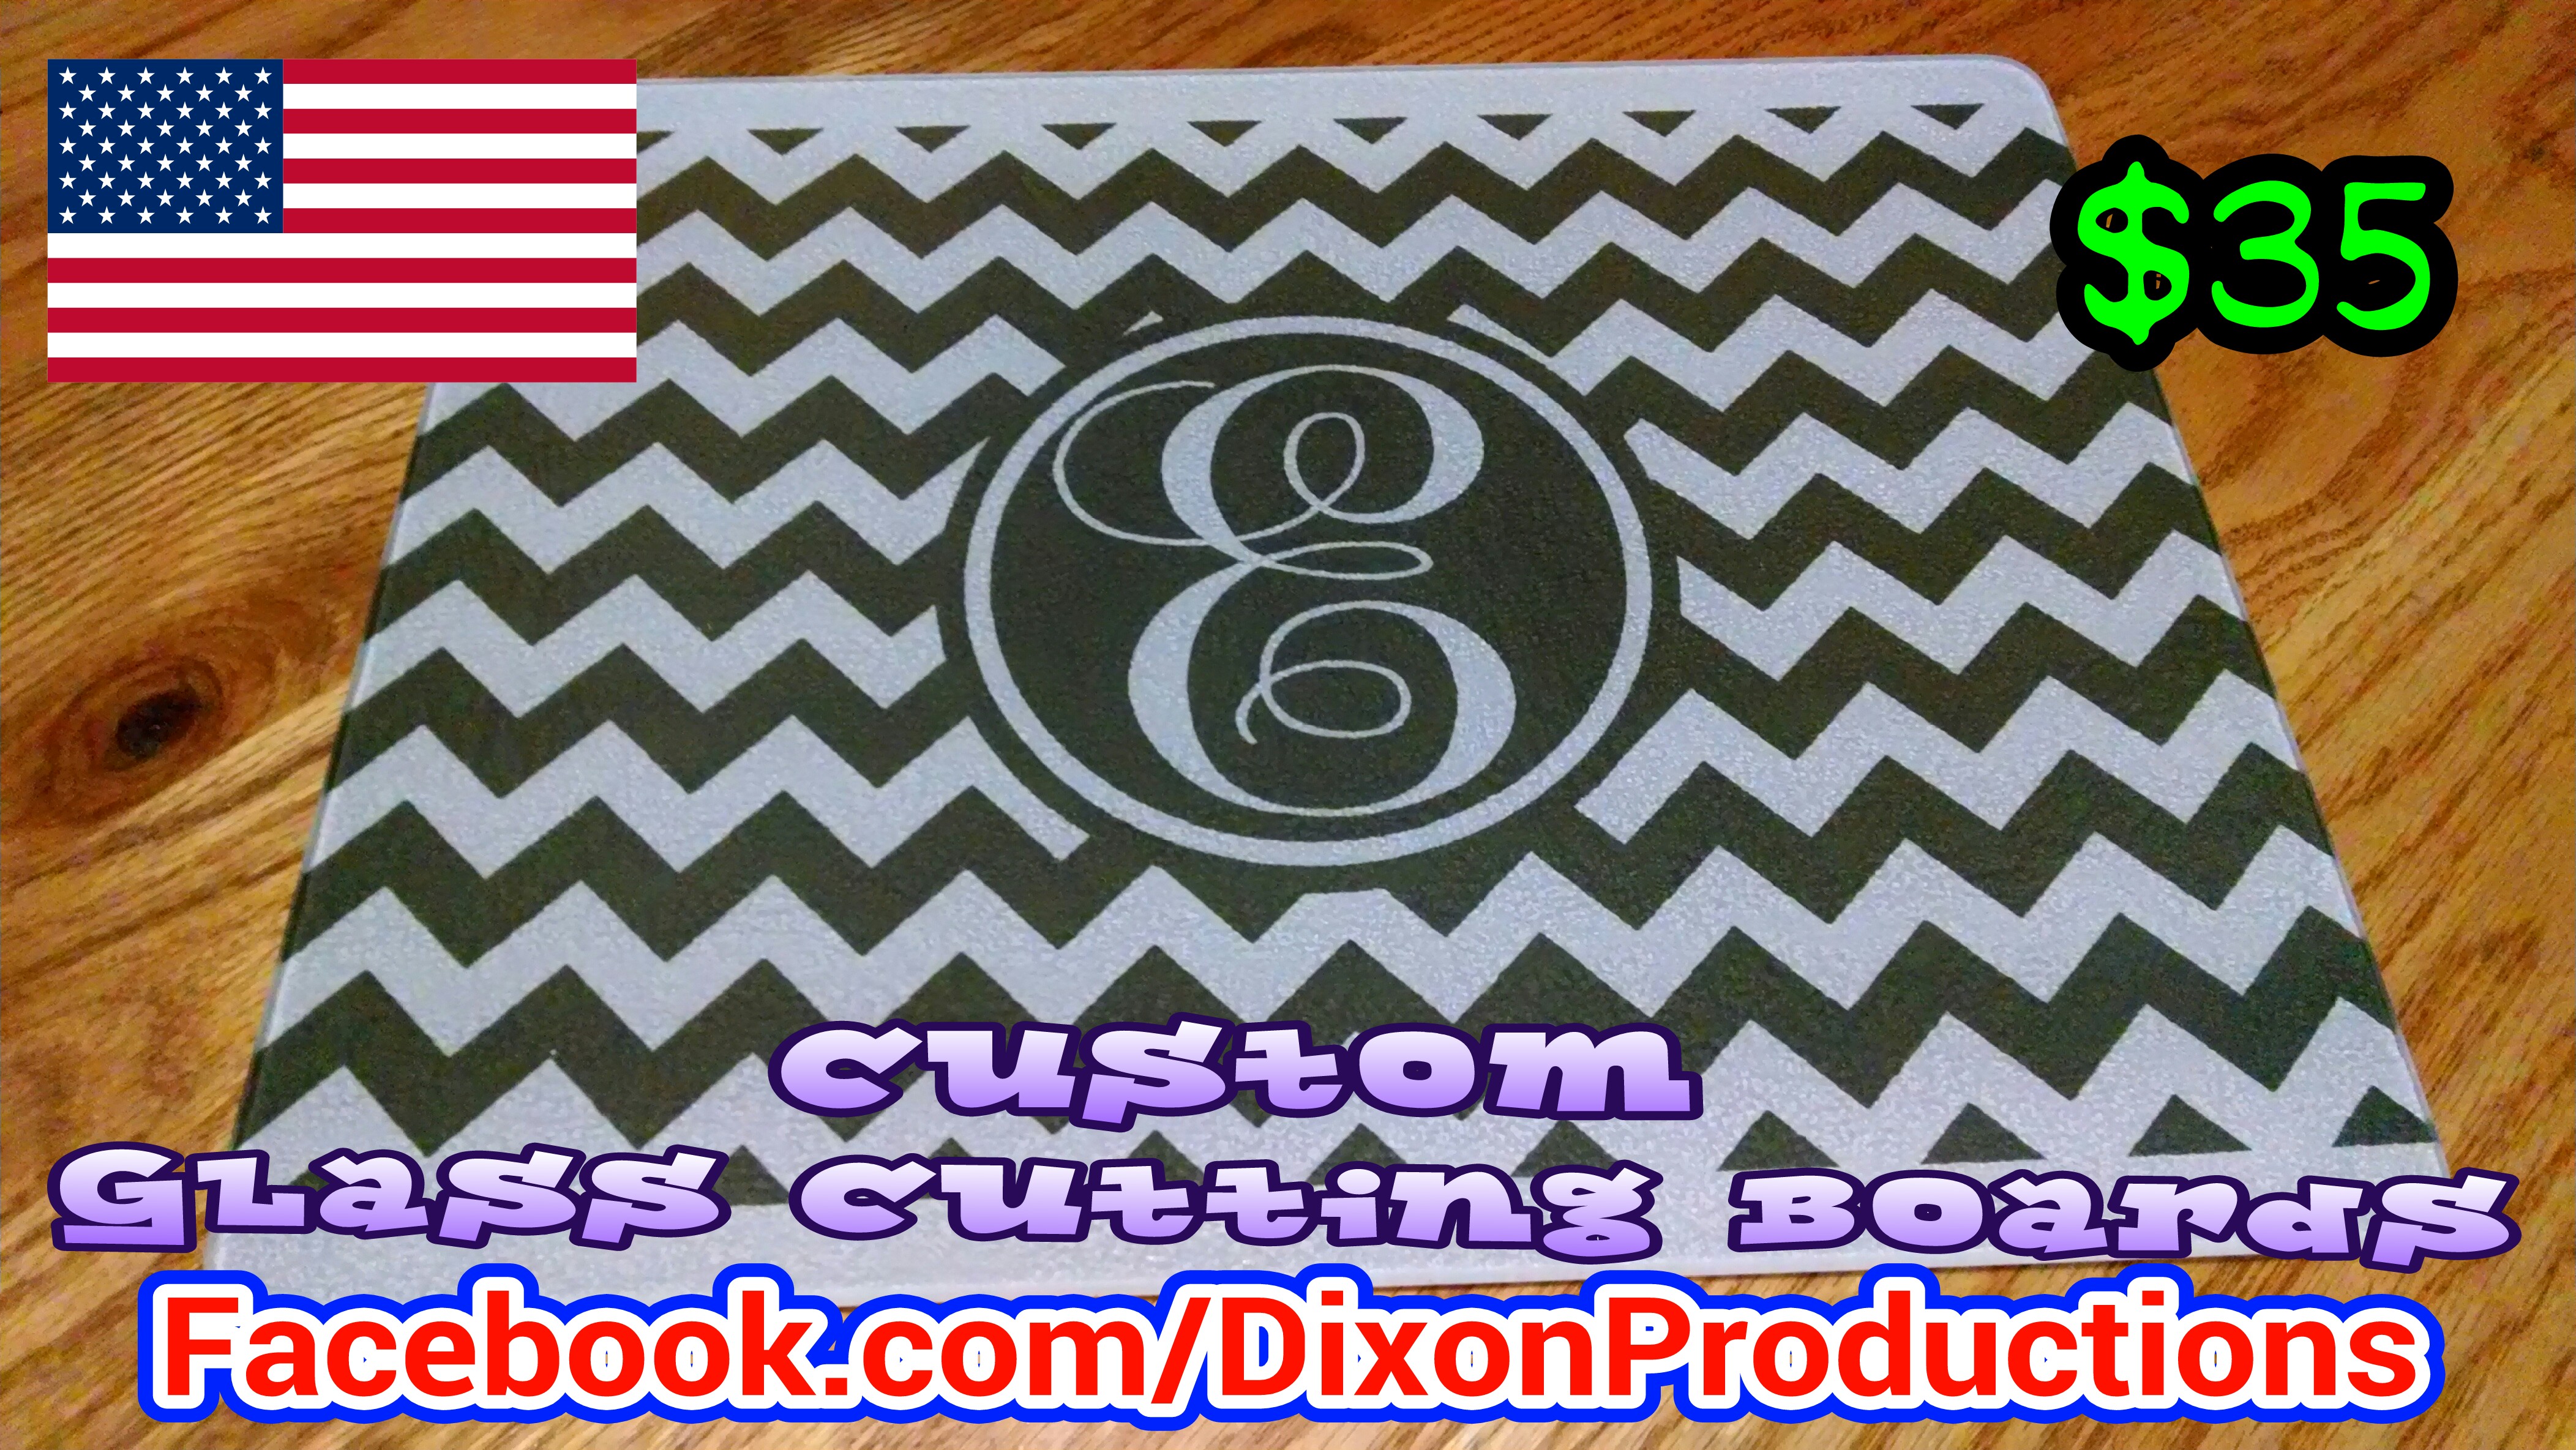 DIXON PRODUCTIONS made with sublimation printing